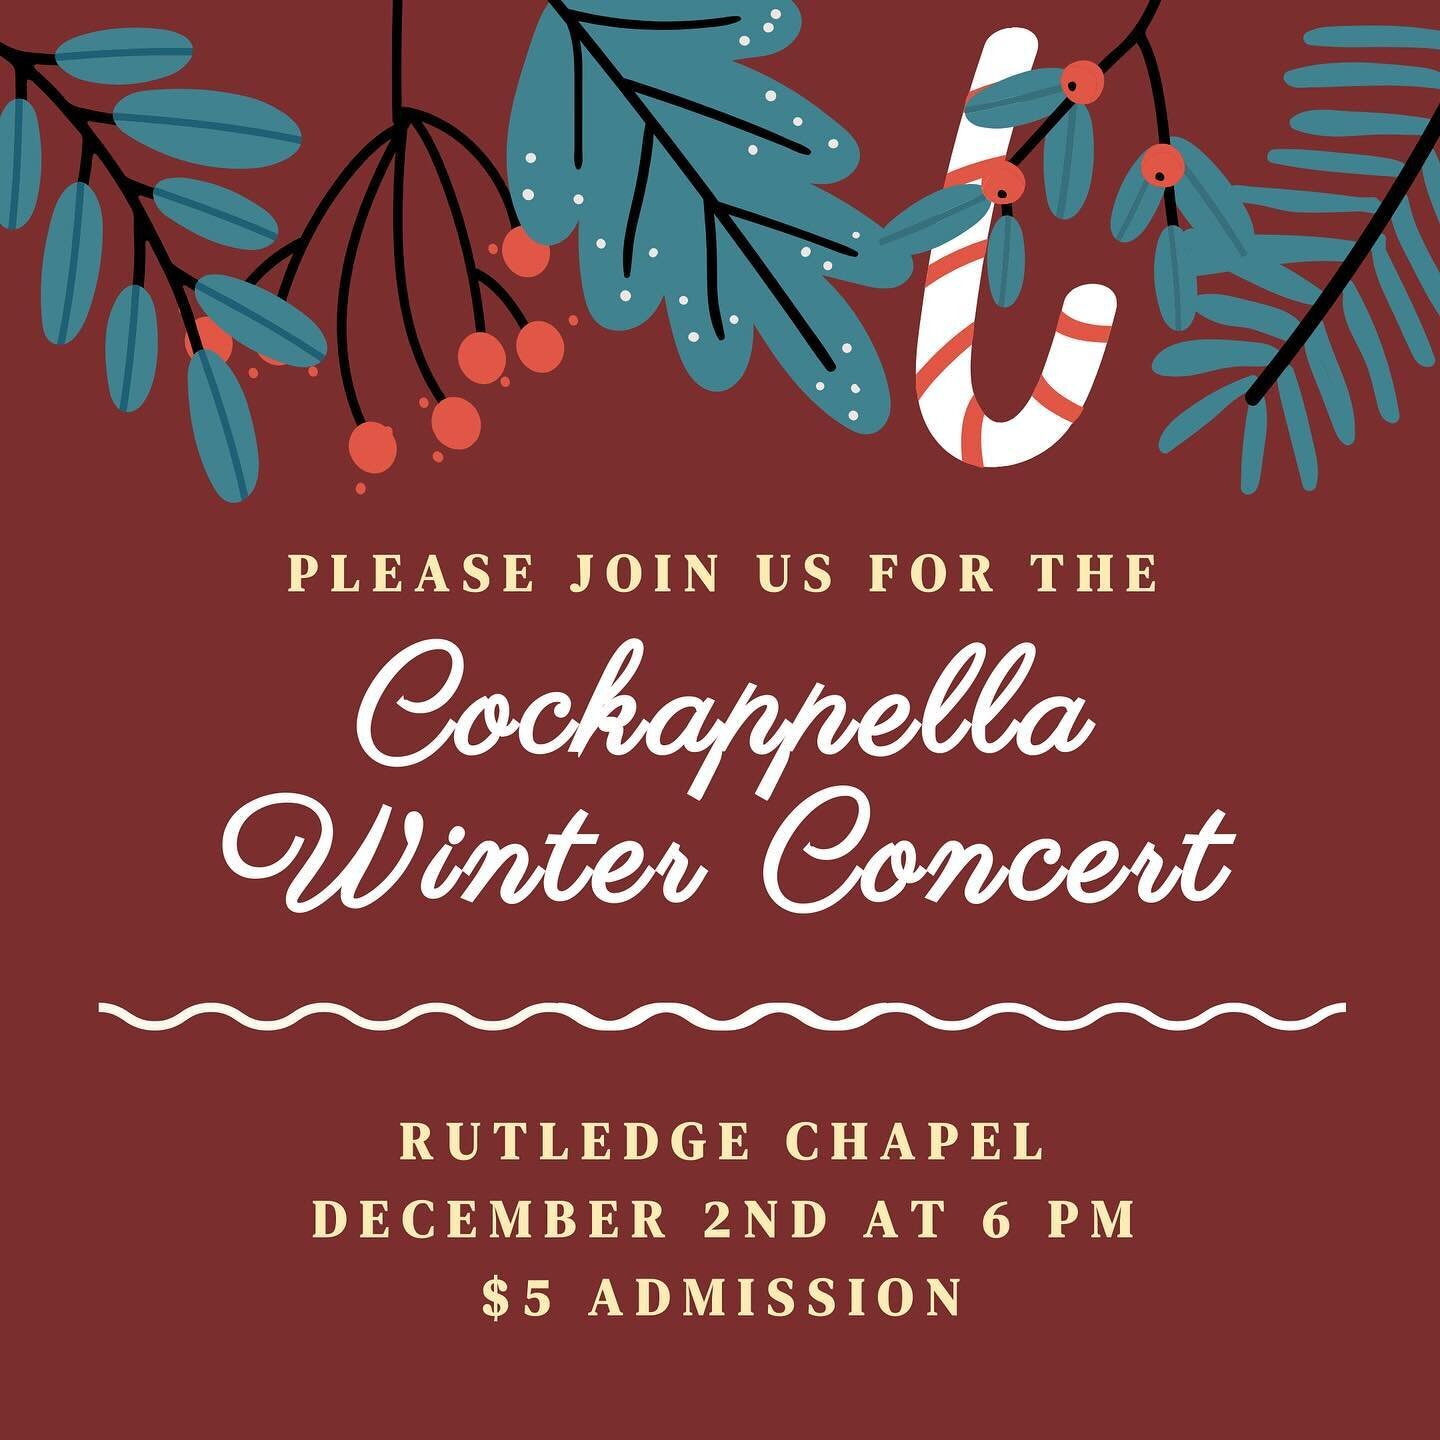 come out to our last performance of the semester THIS saturday at 6 pm in rutledge chapel 🫶 we hope to see you there!

tickets will be $5 and can be bought with cash or venmo (@cockappella). a live stream will also be up on our youtube page (@cockap